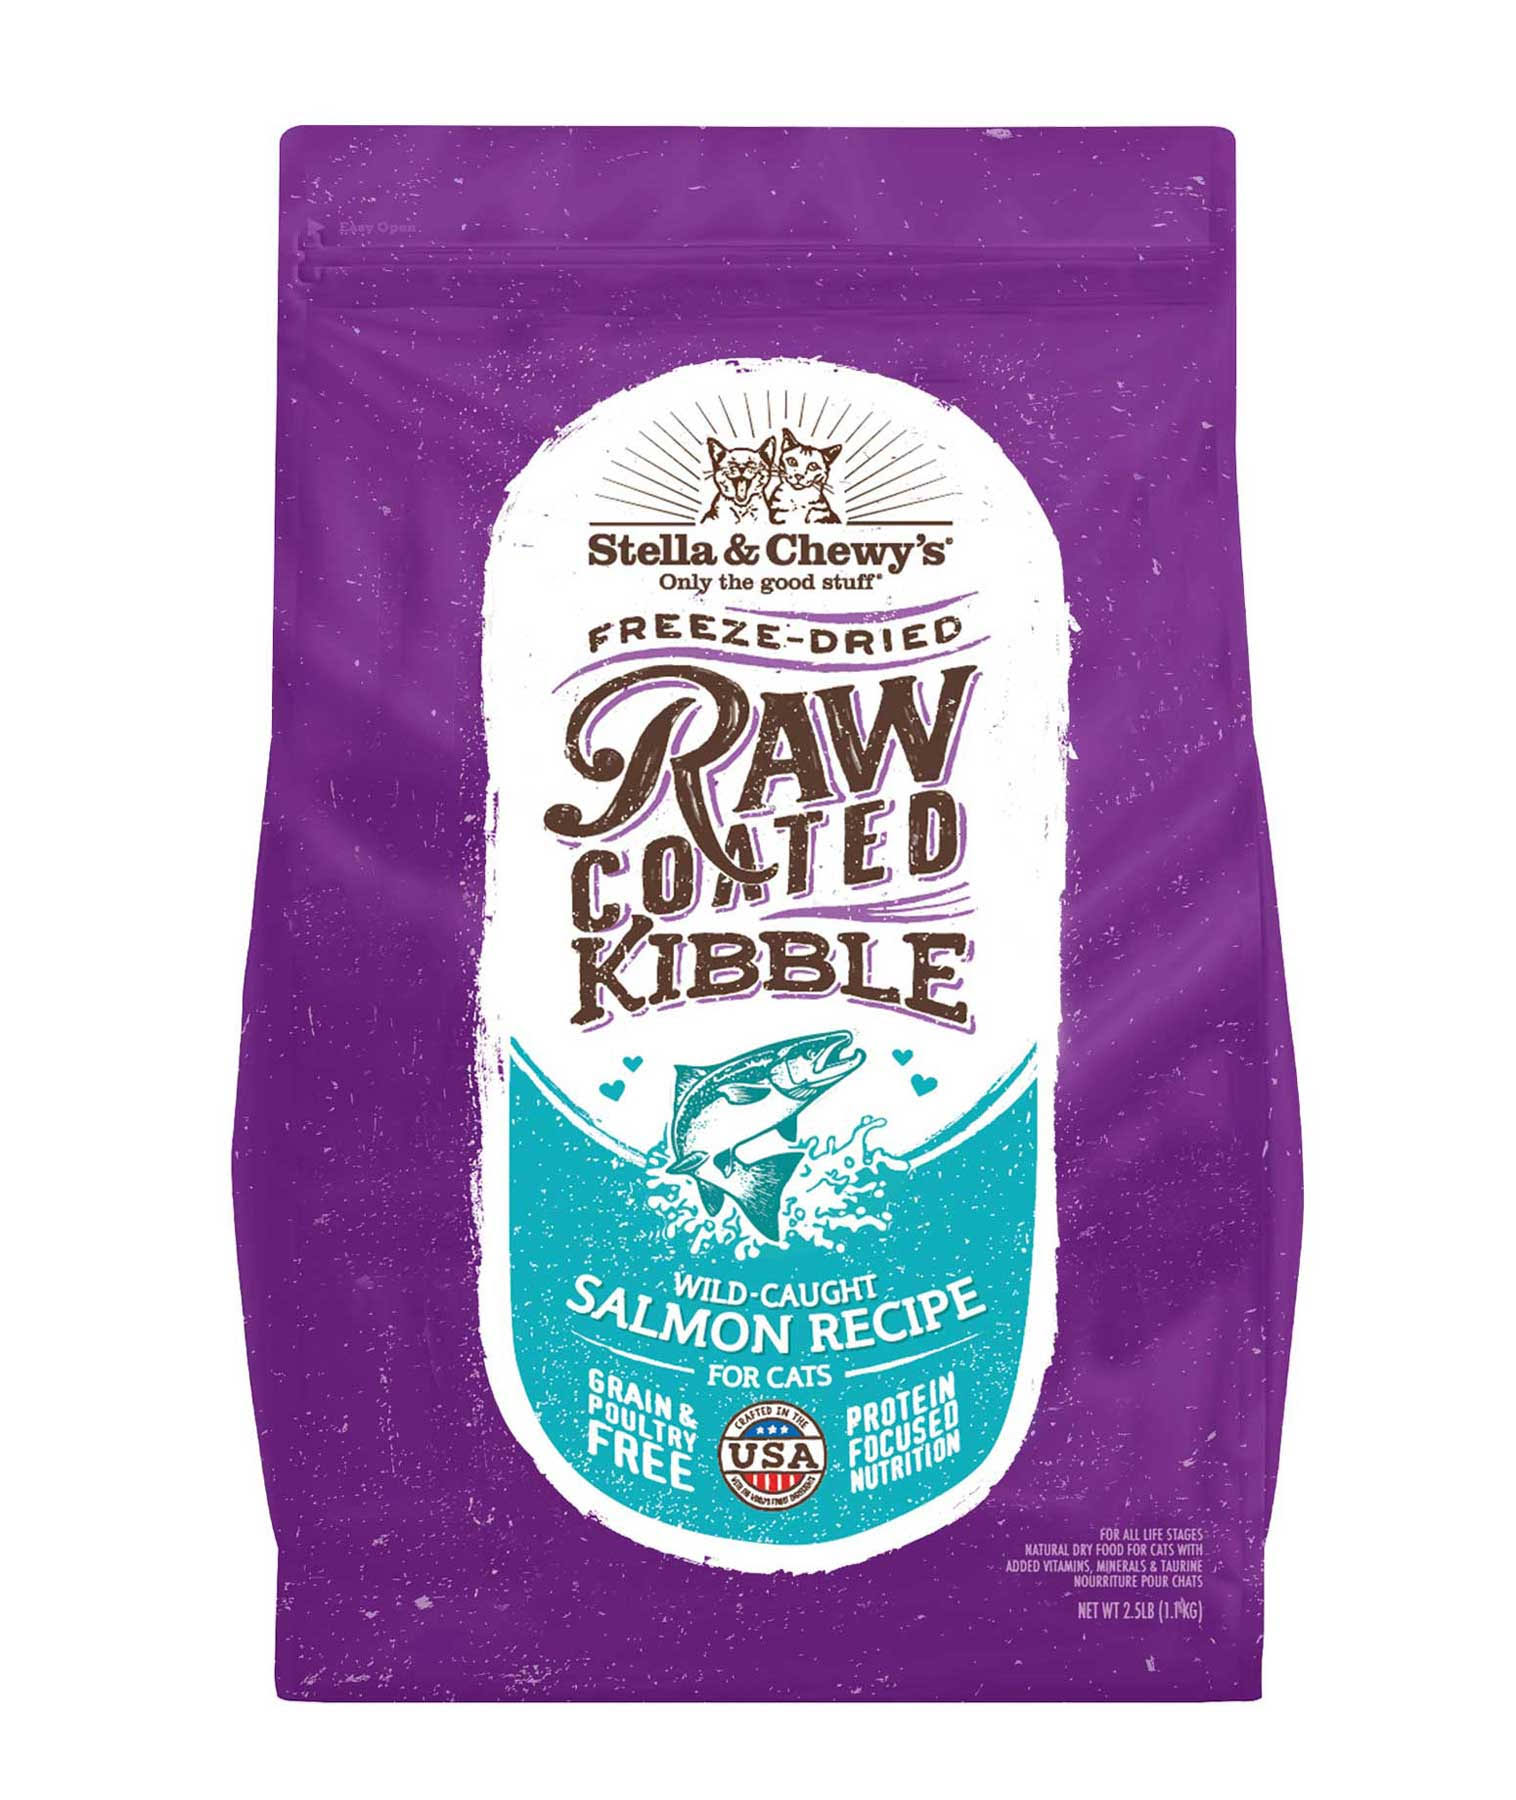 Stella & Chewy's Raw Coated Kibble Wild Caught Salmon Recipe Dry Cat Food, 5 lbs